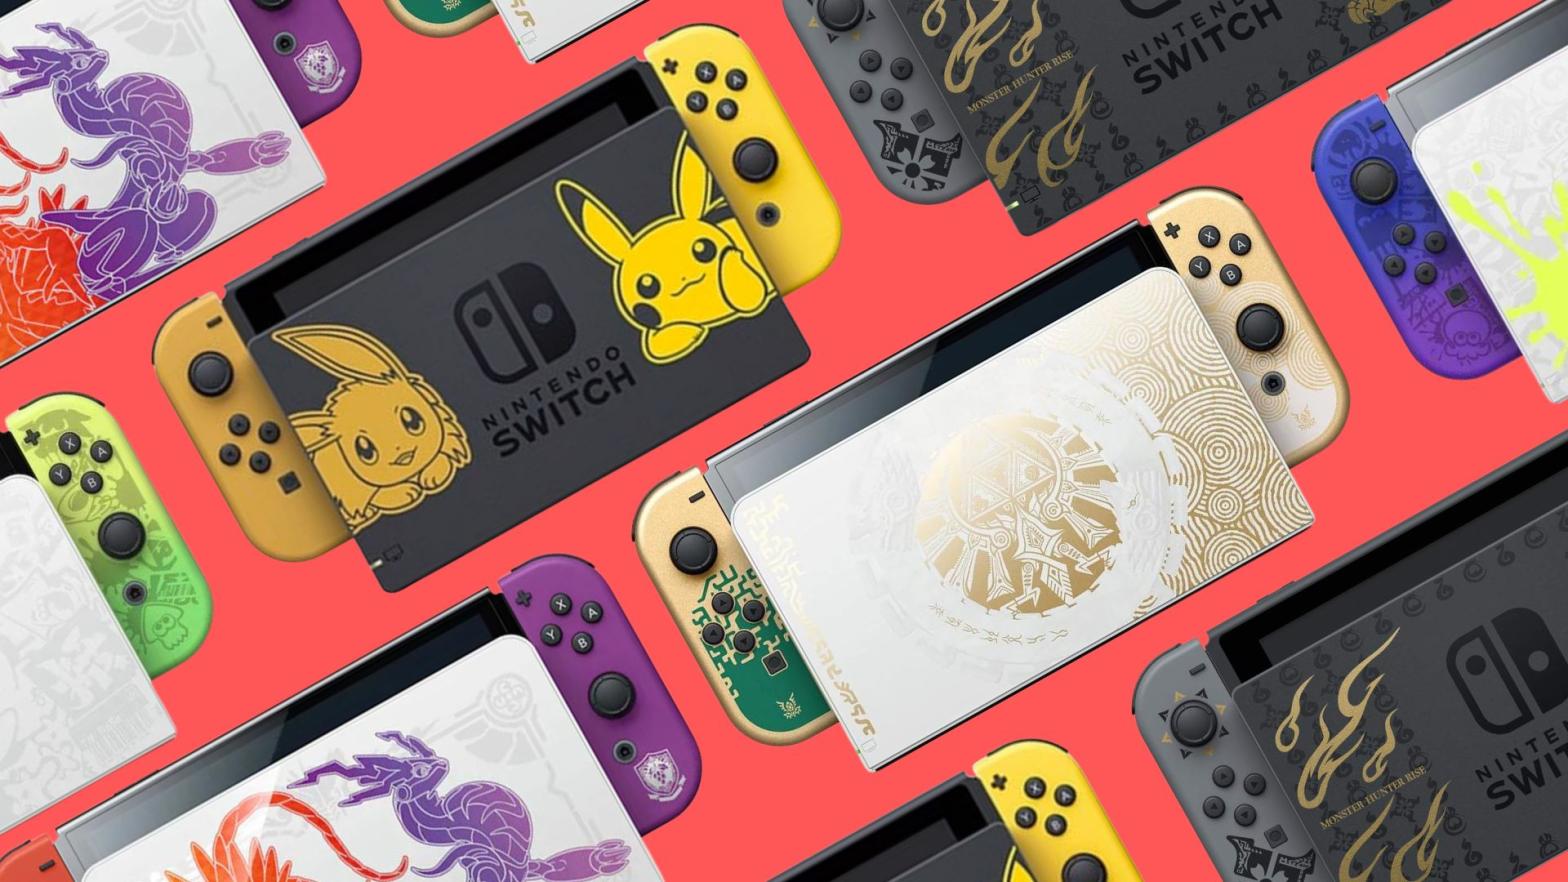 Nintendo Switch limited edition consoles